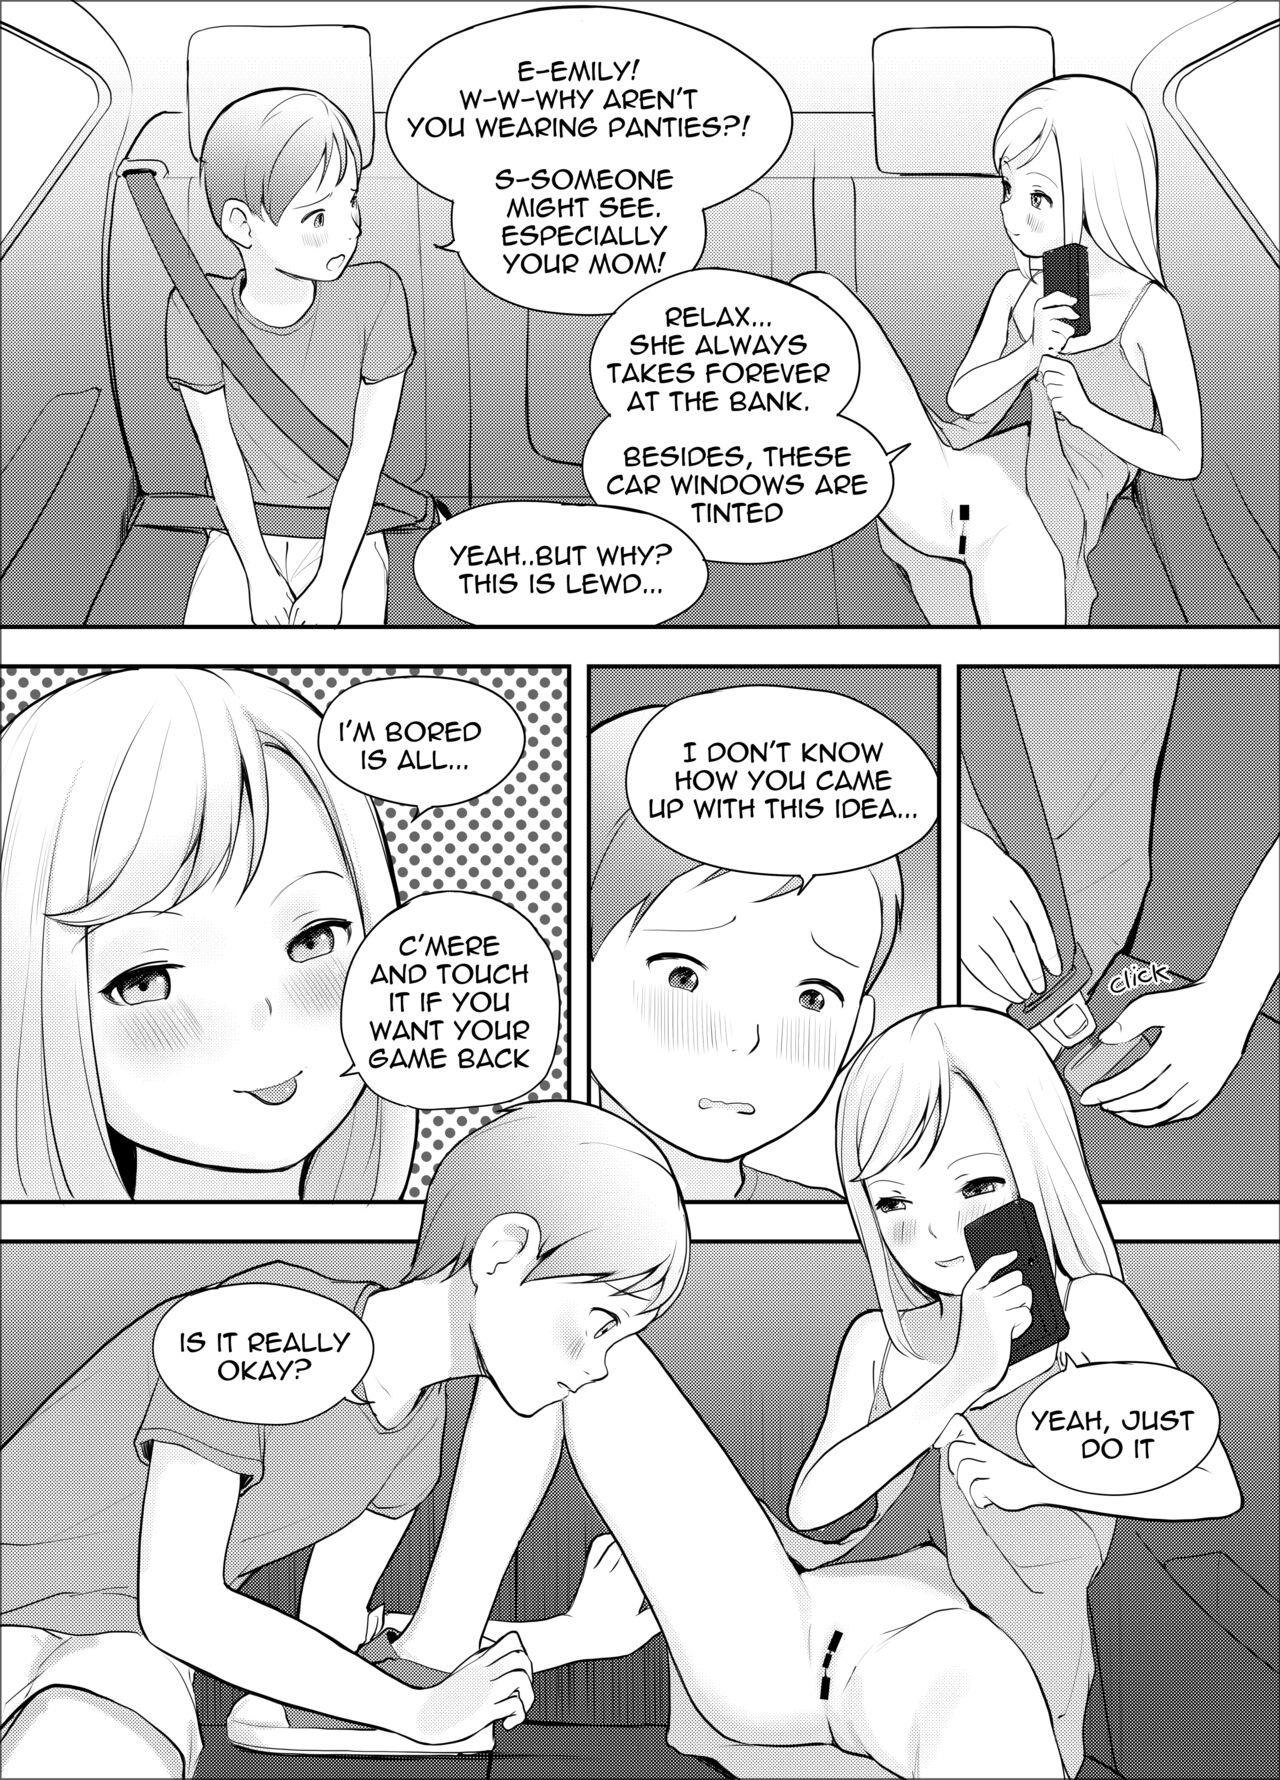 Blowjob Passing the Time - Original Fucking - Page 5